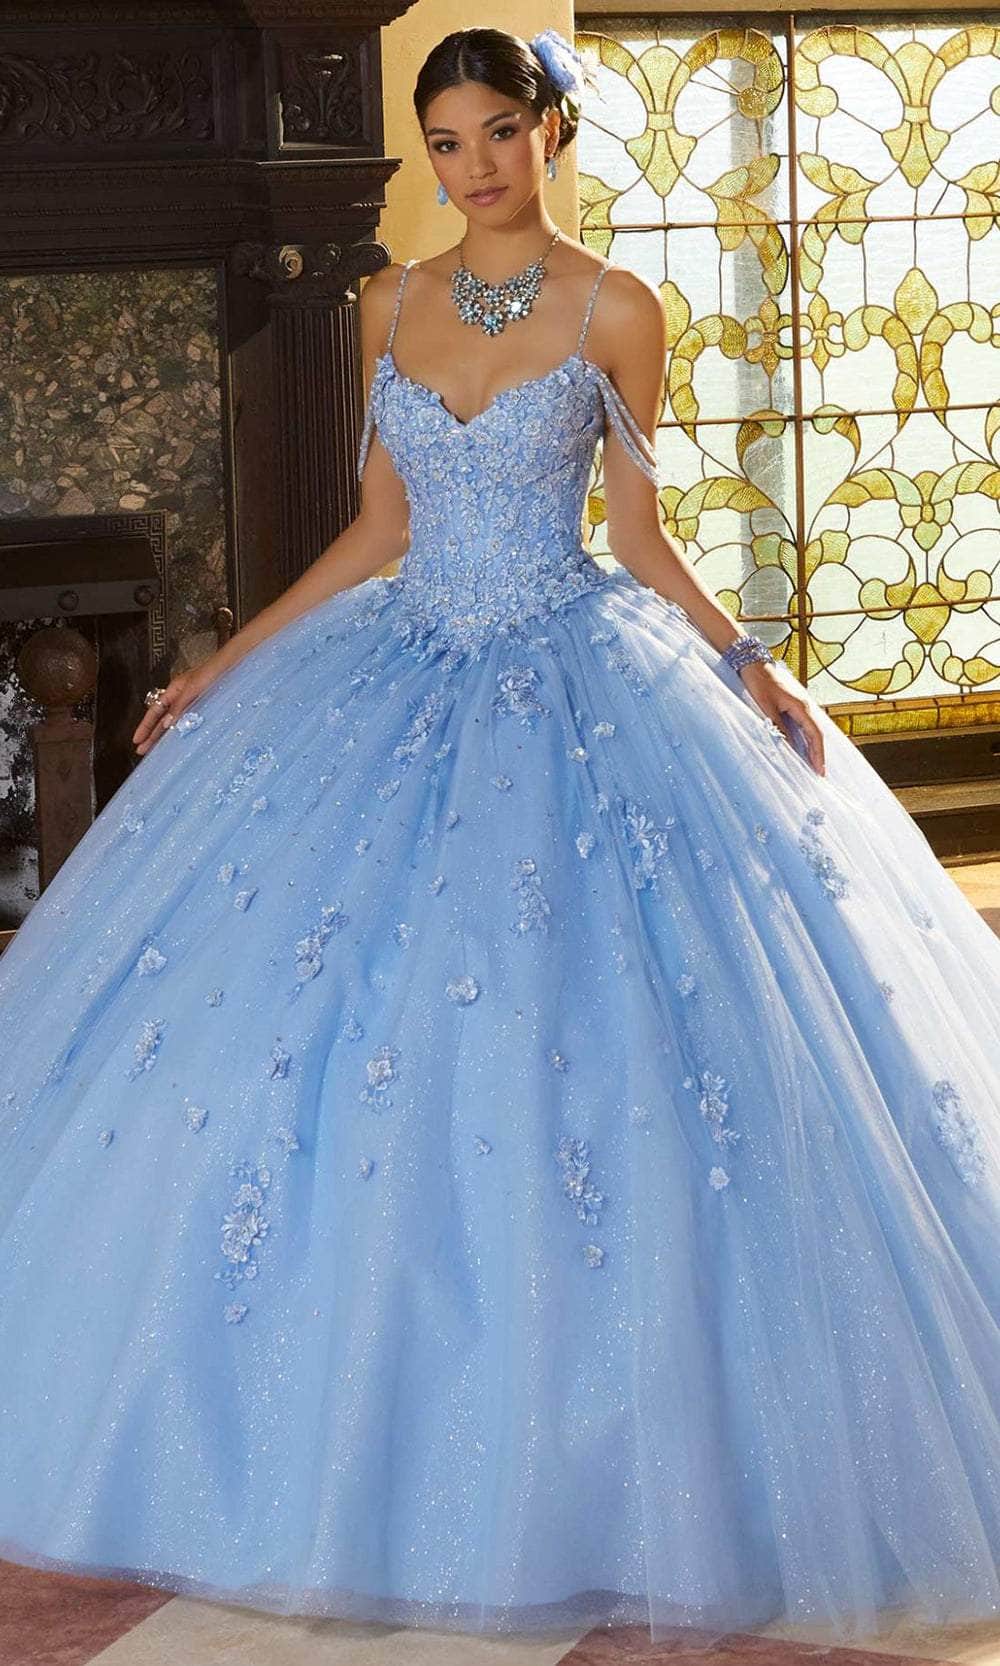 Image of Mori Lee 60155 - Thin Strapped Floral Appliqued Ballgown